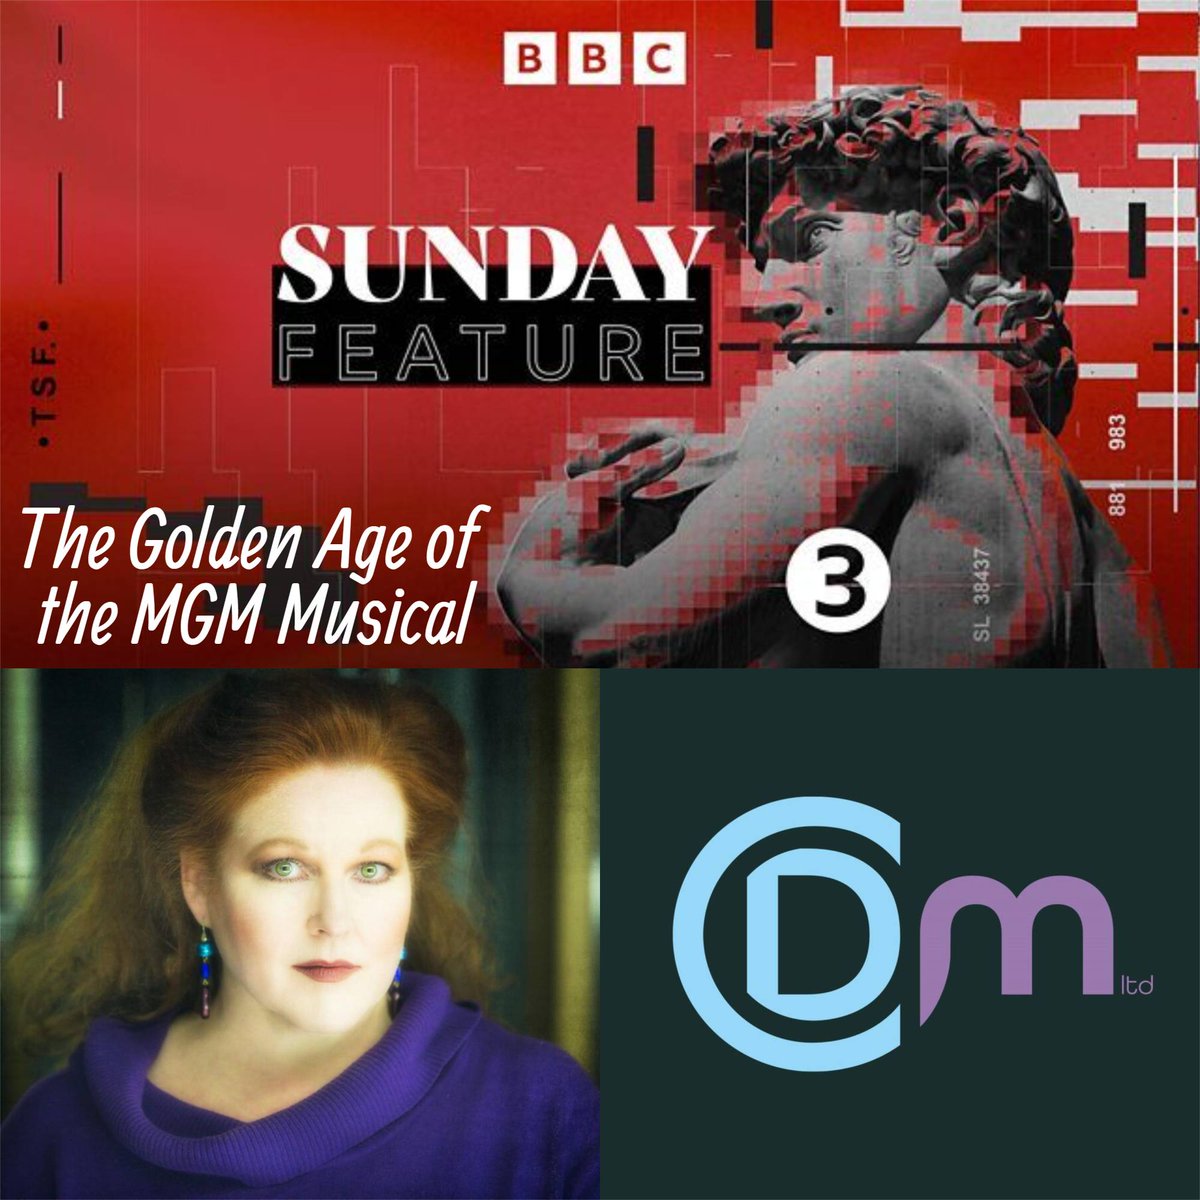 Tune into BBC Radio 3 tonight at 7.15pm for Sunday Feature's The Golden Age of the MGM Musical, presented by Musician and broadcaster Neil Brand and featuring interviews with client KIM CRISWELL (@KimDCriswell). @BBCRadio3 @NeilKBrand